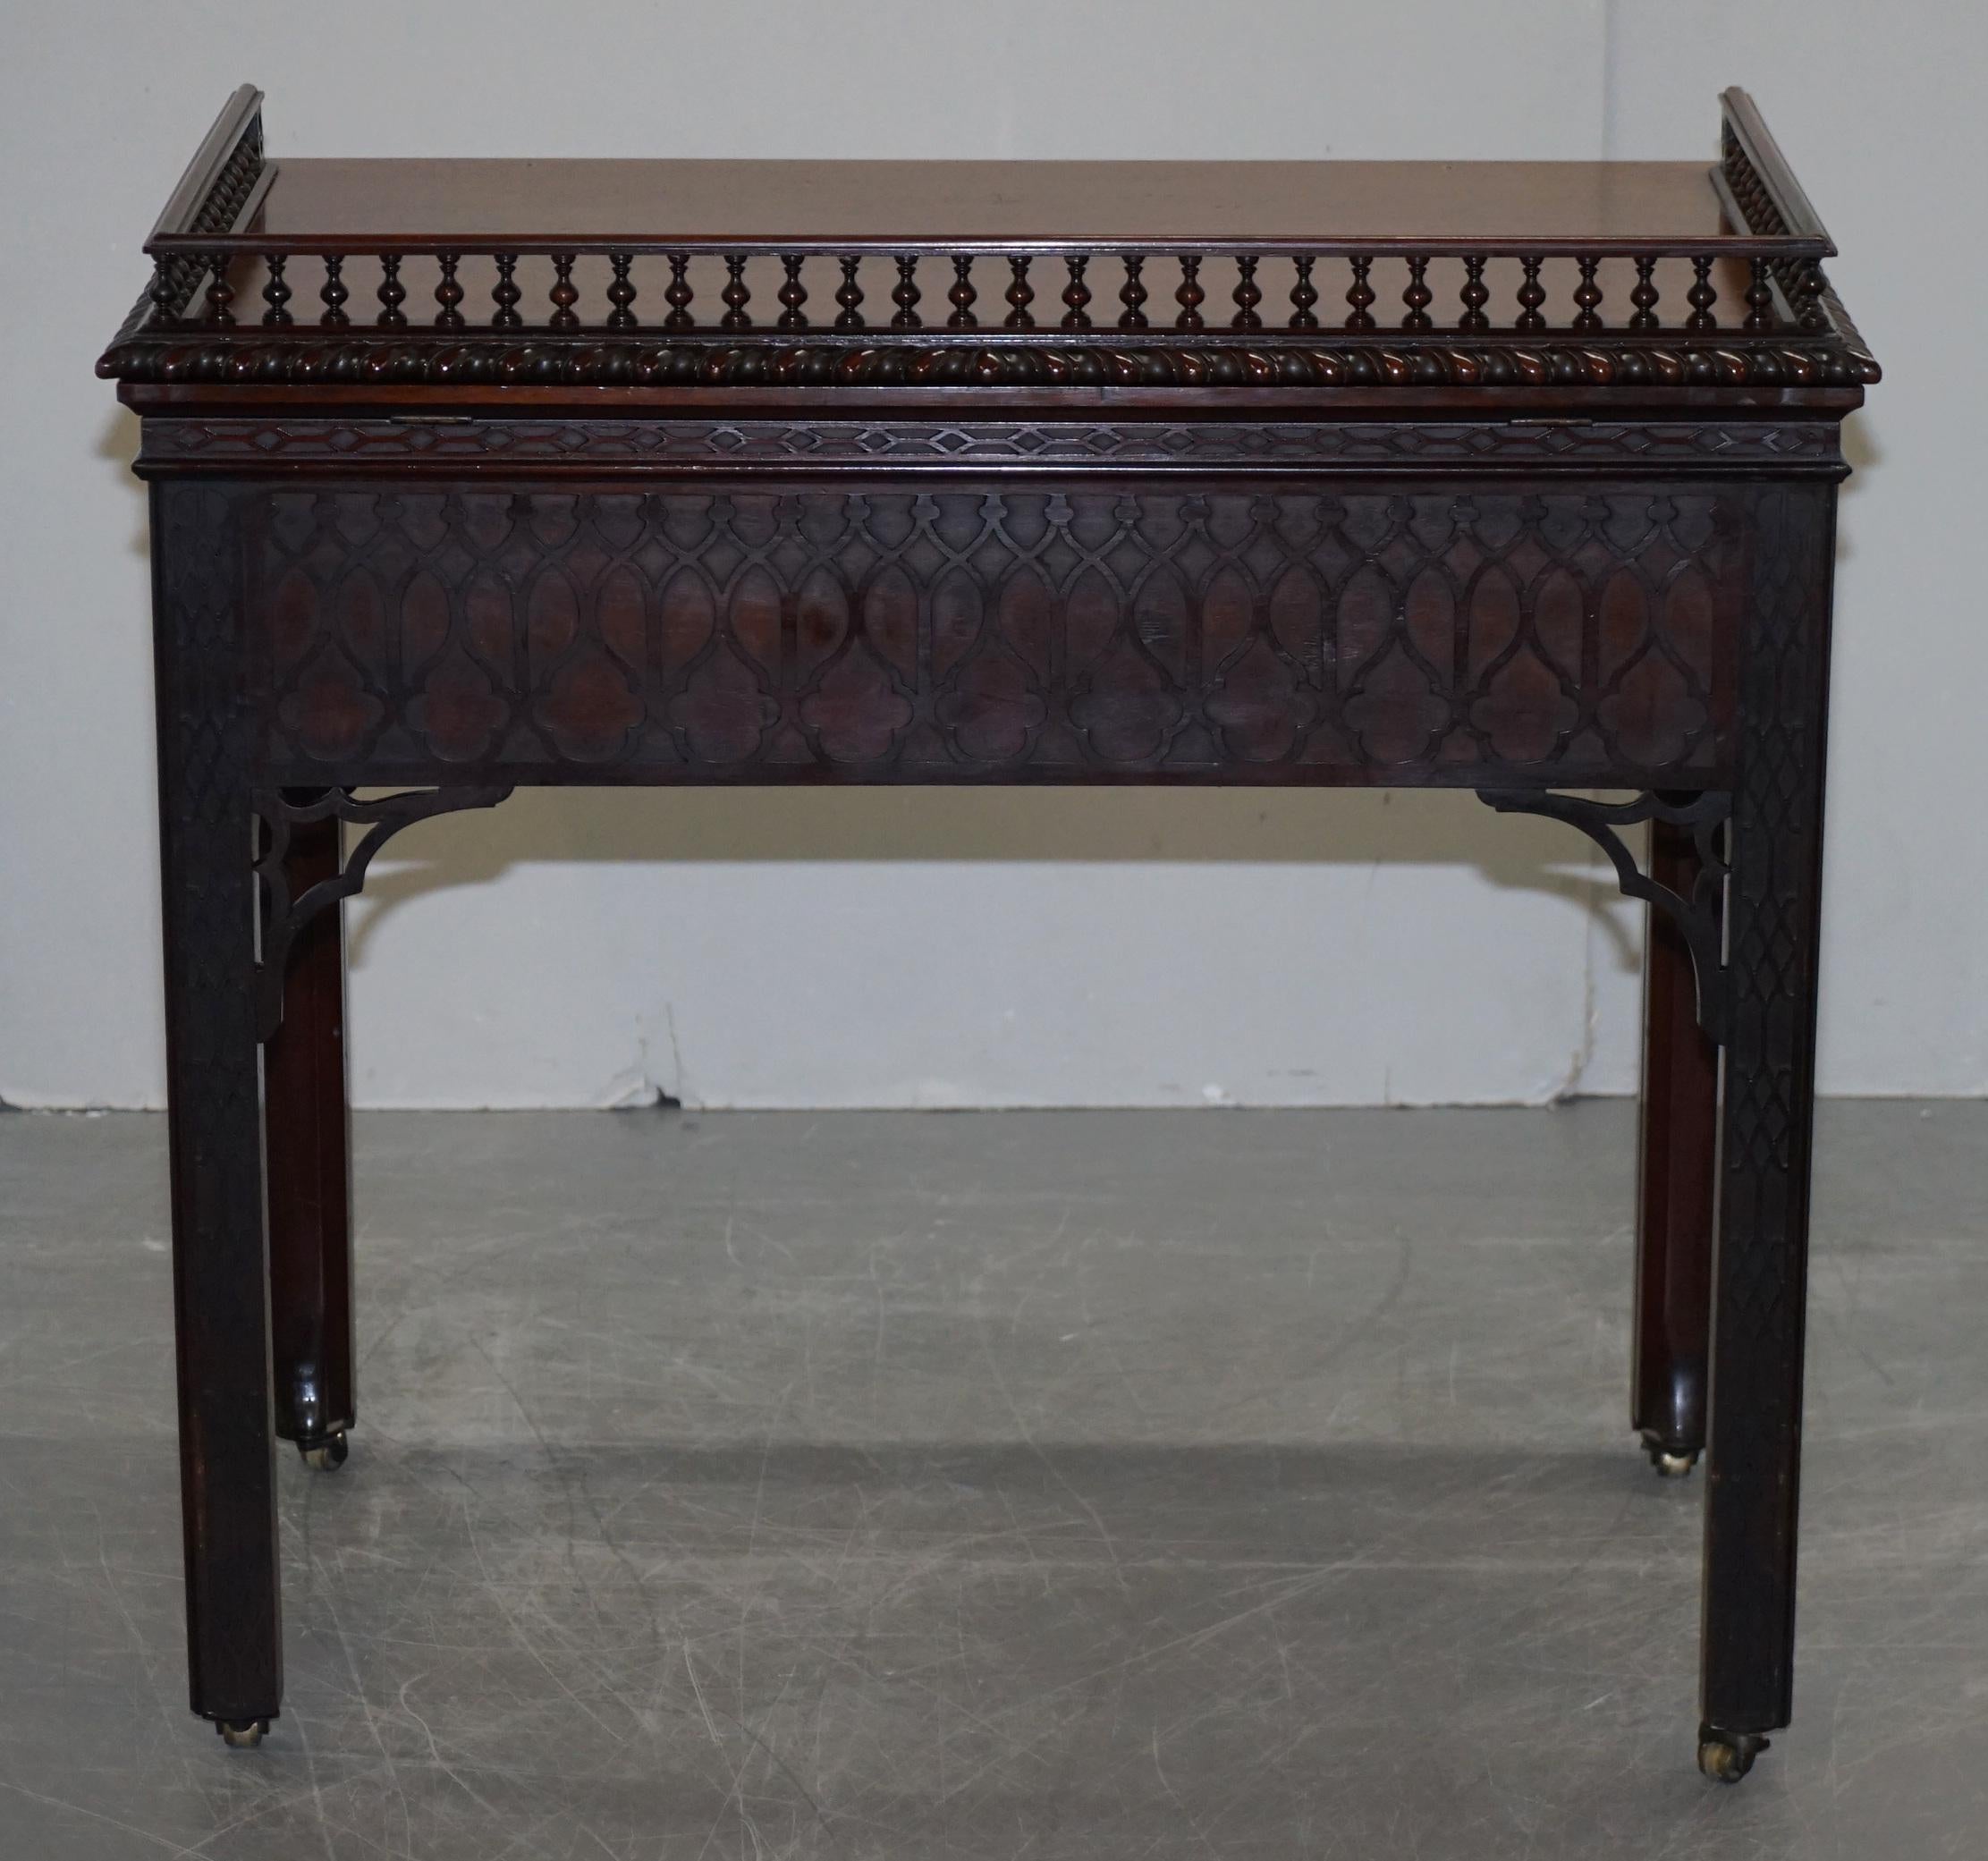 Original Thomas Chippendale George III Hardwood Architect's Work Desk Table For Sale 5